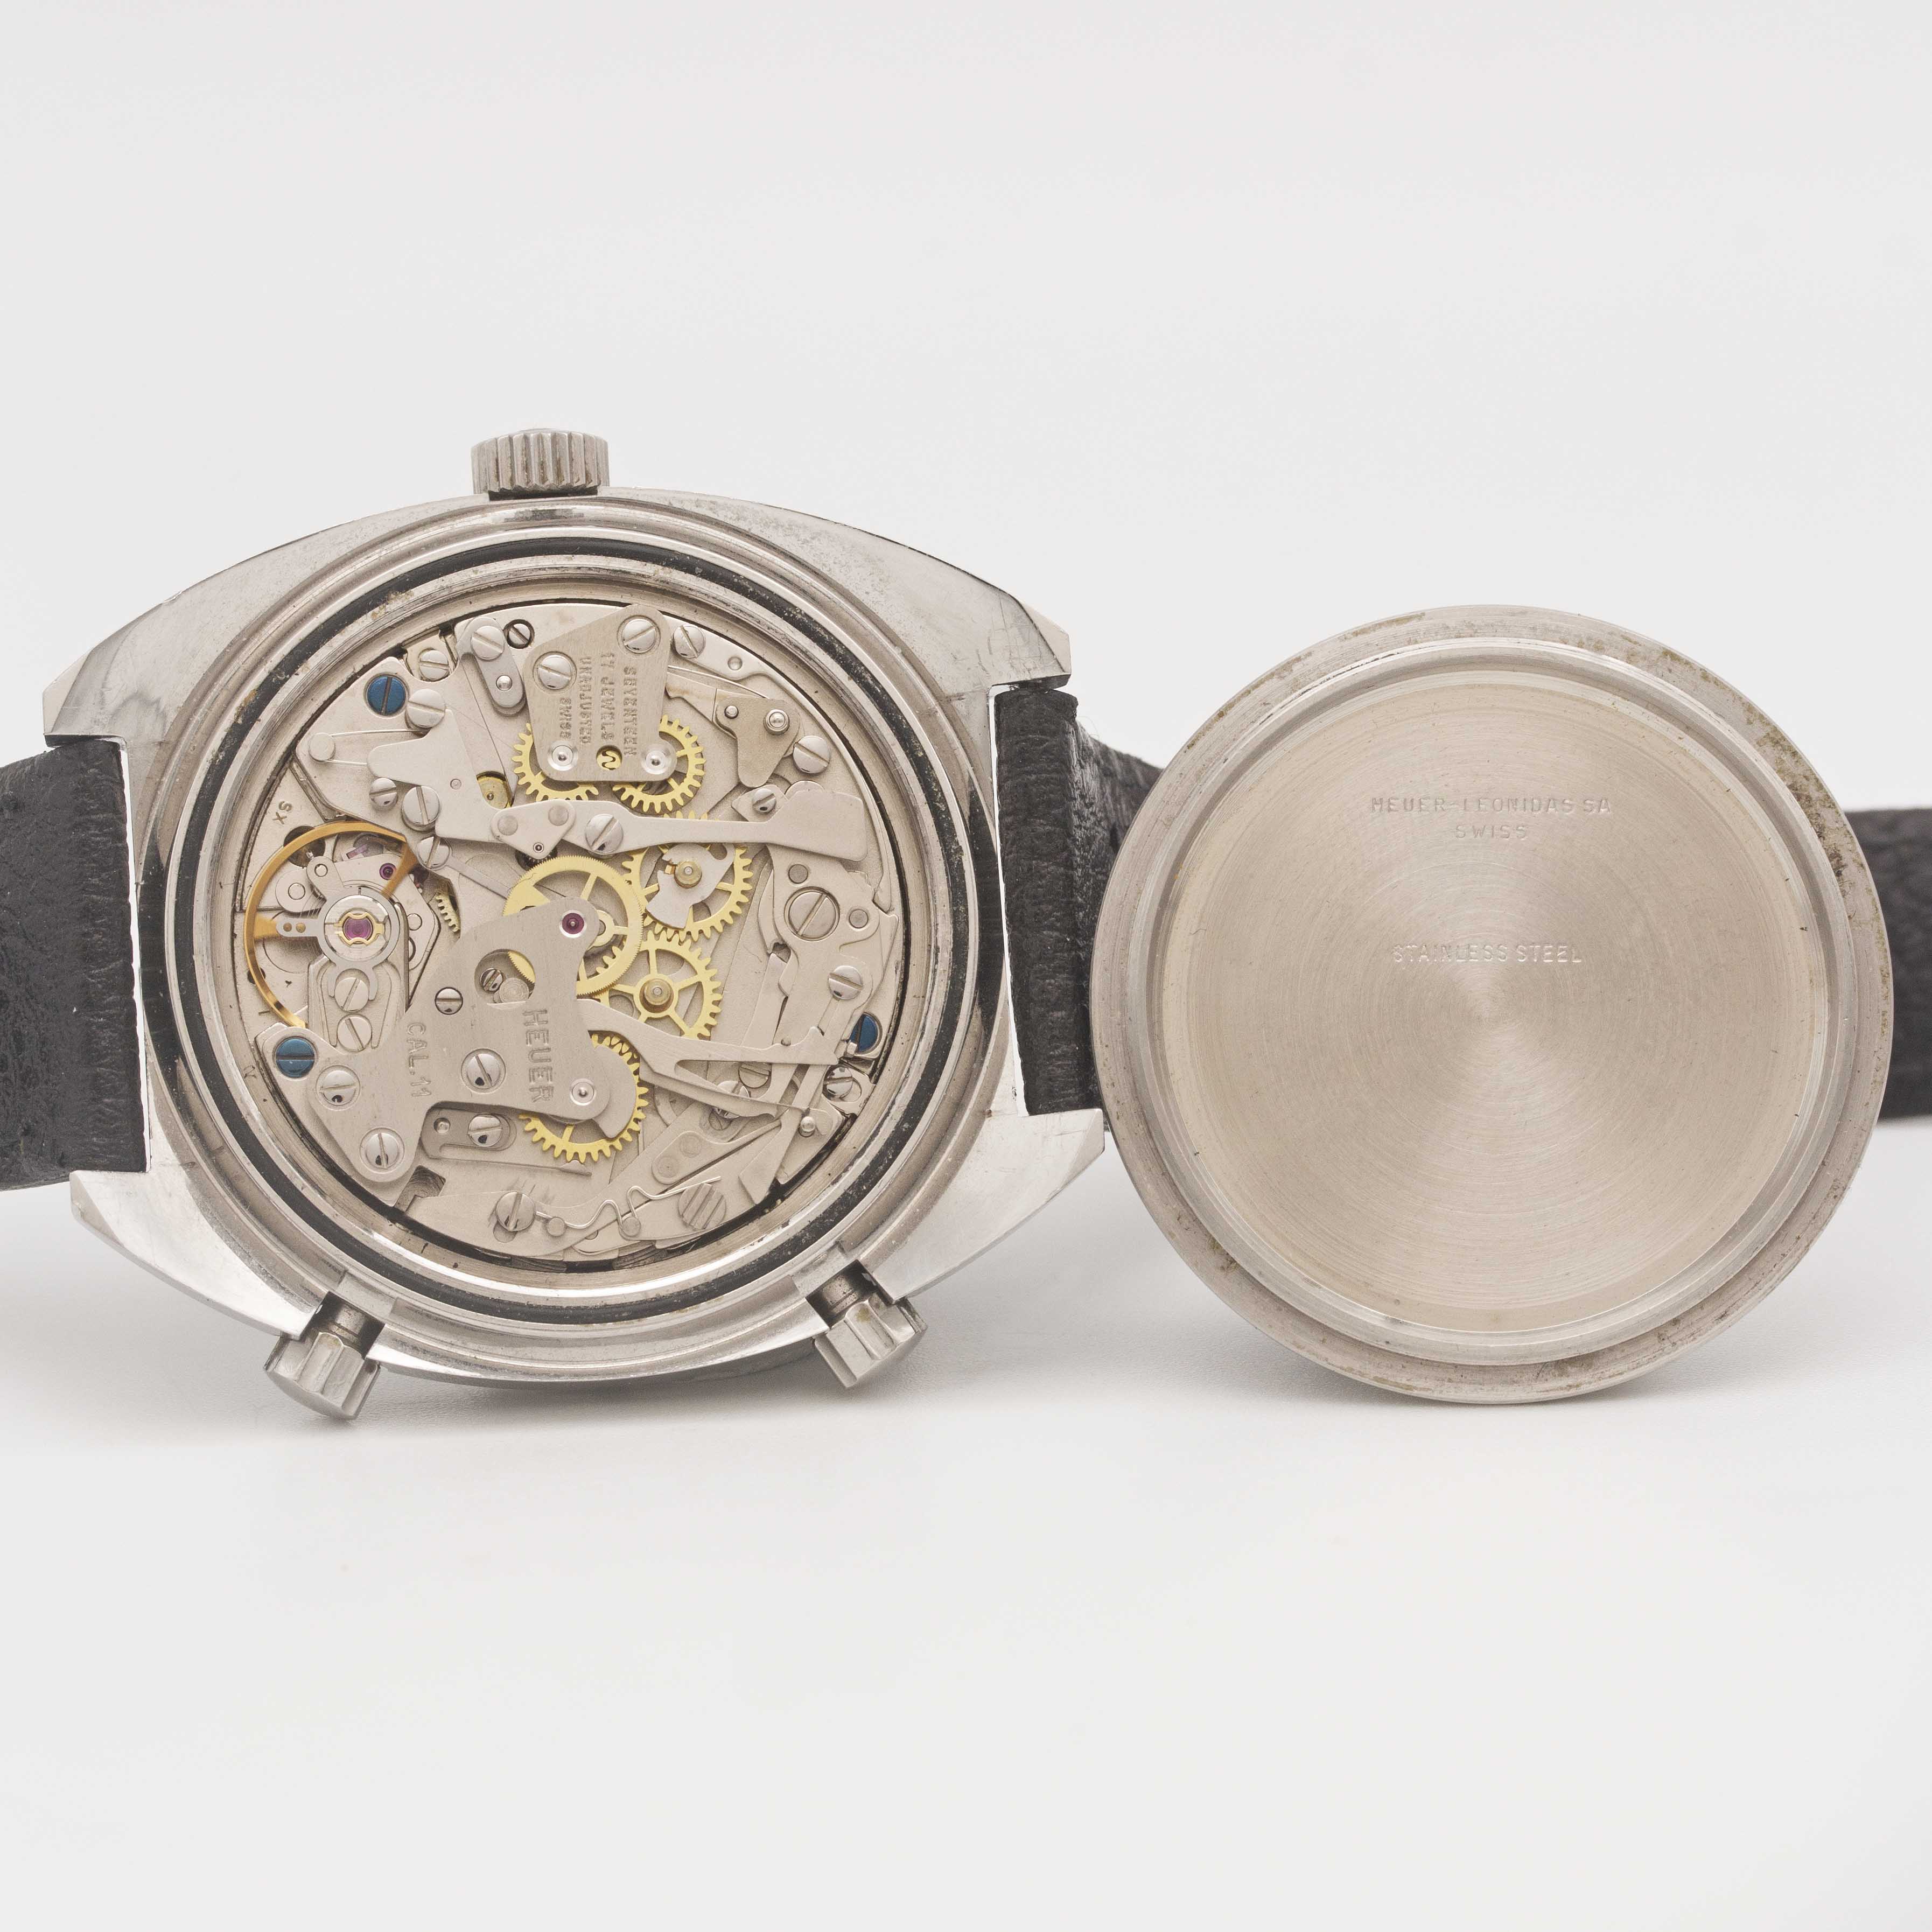 A GENTLEMAN'S STAINLESS STEEL HEUER "VICEROY" AUTAVIA CHRONOGRAPH WRIST WATCH CIRCA 1970s, REF. - Image 8 of 10